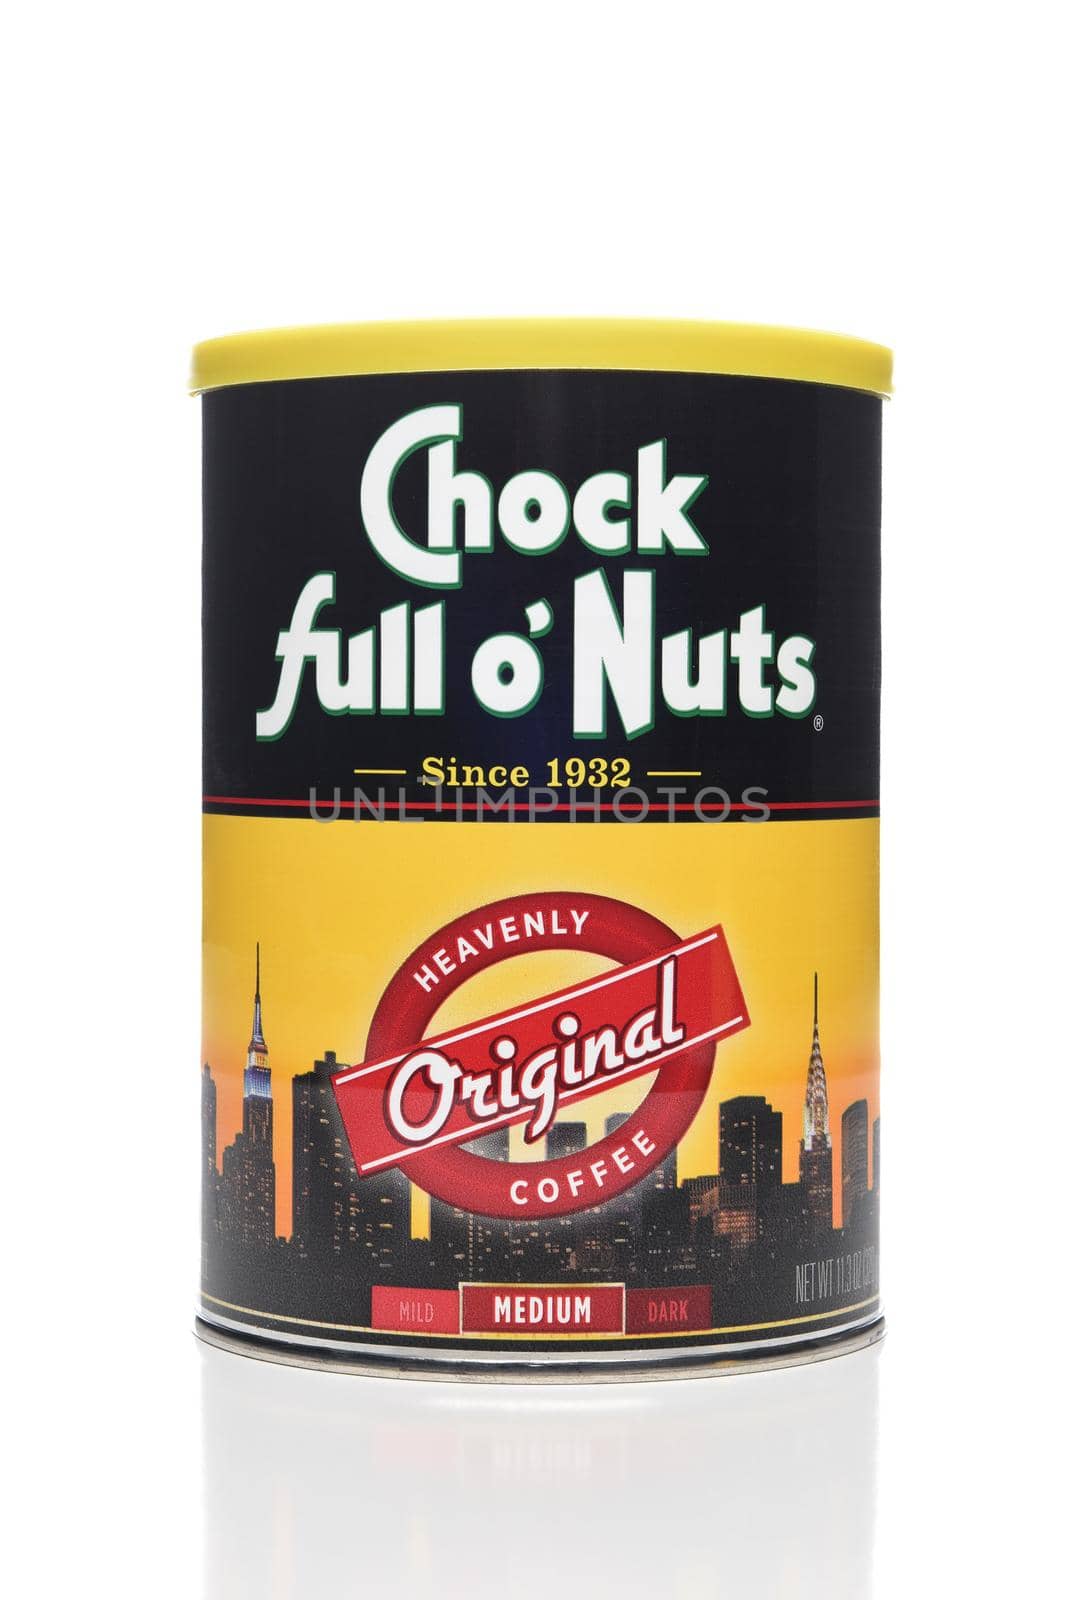 IRVINE, CALIFORNIA - OCT 27, 2018: A can of Chock Full o Nuts Coffee. The brand originated from a chain of New York City coffee shops.